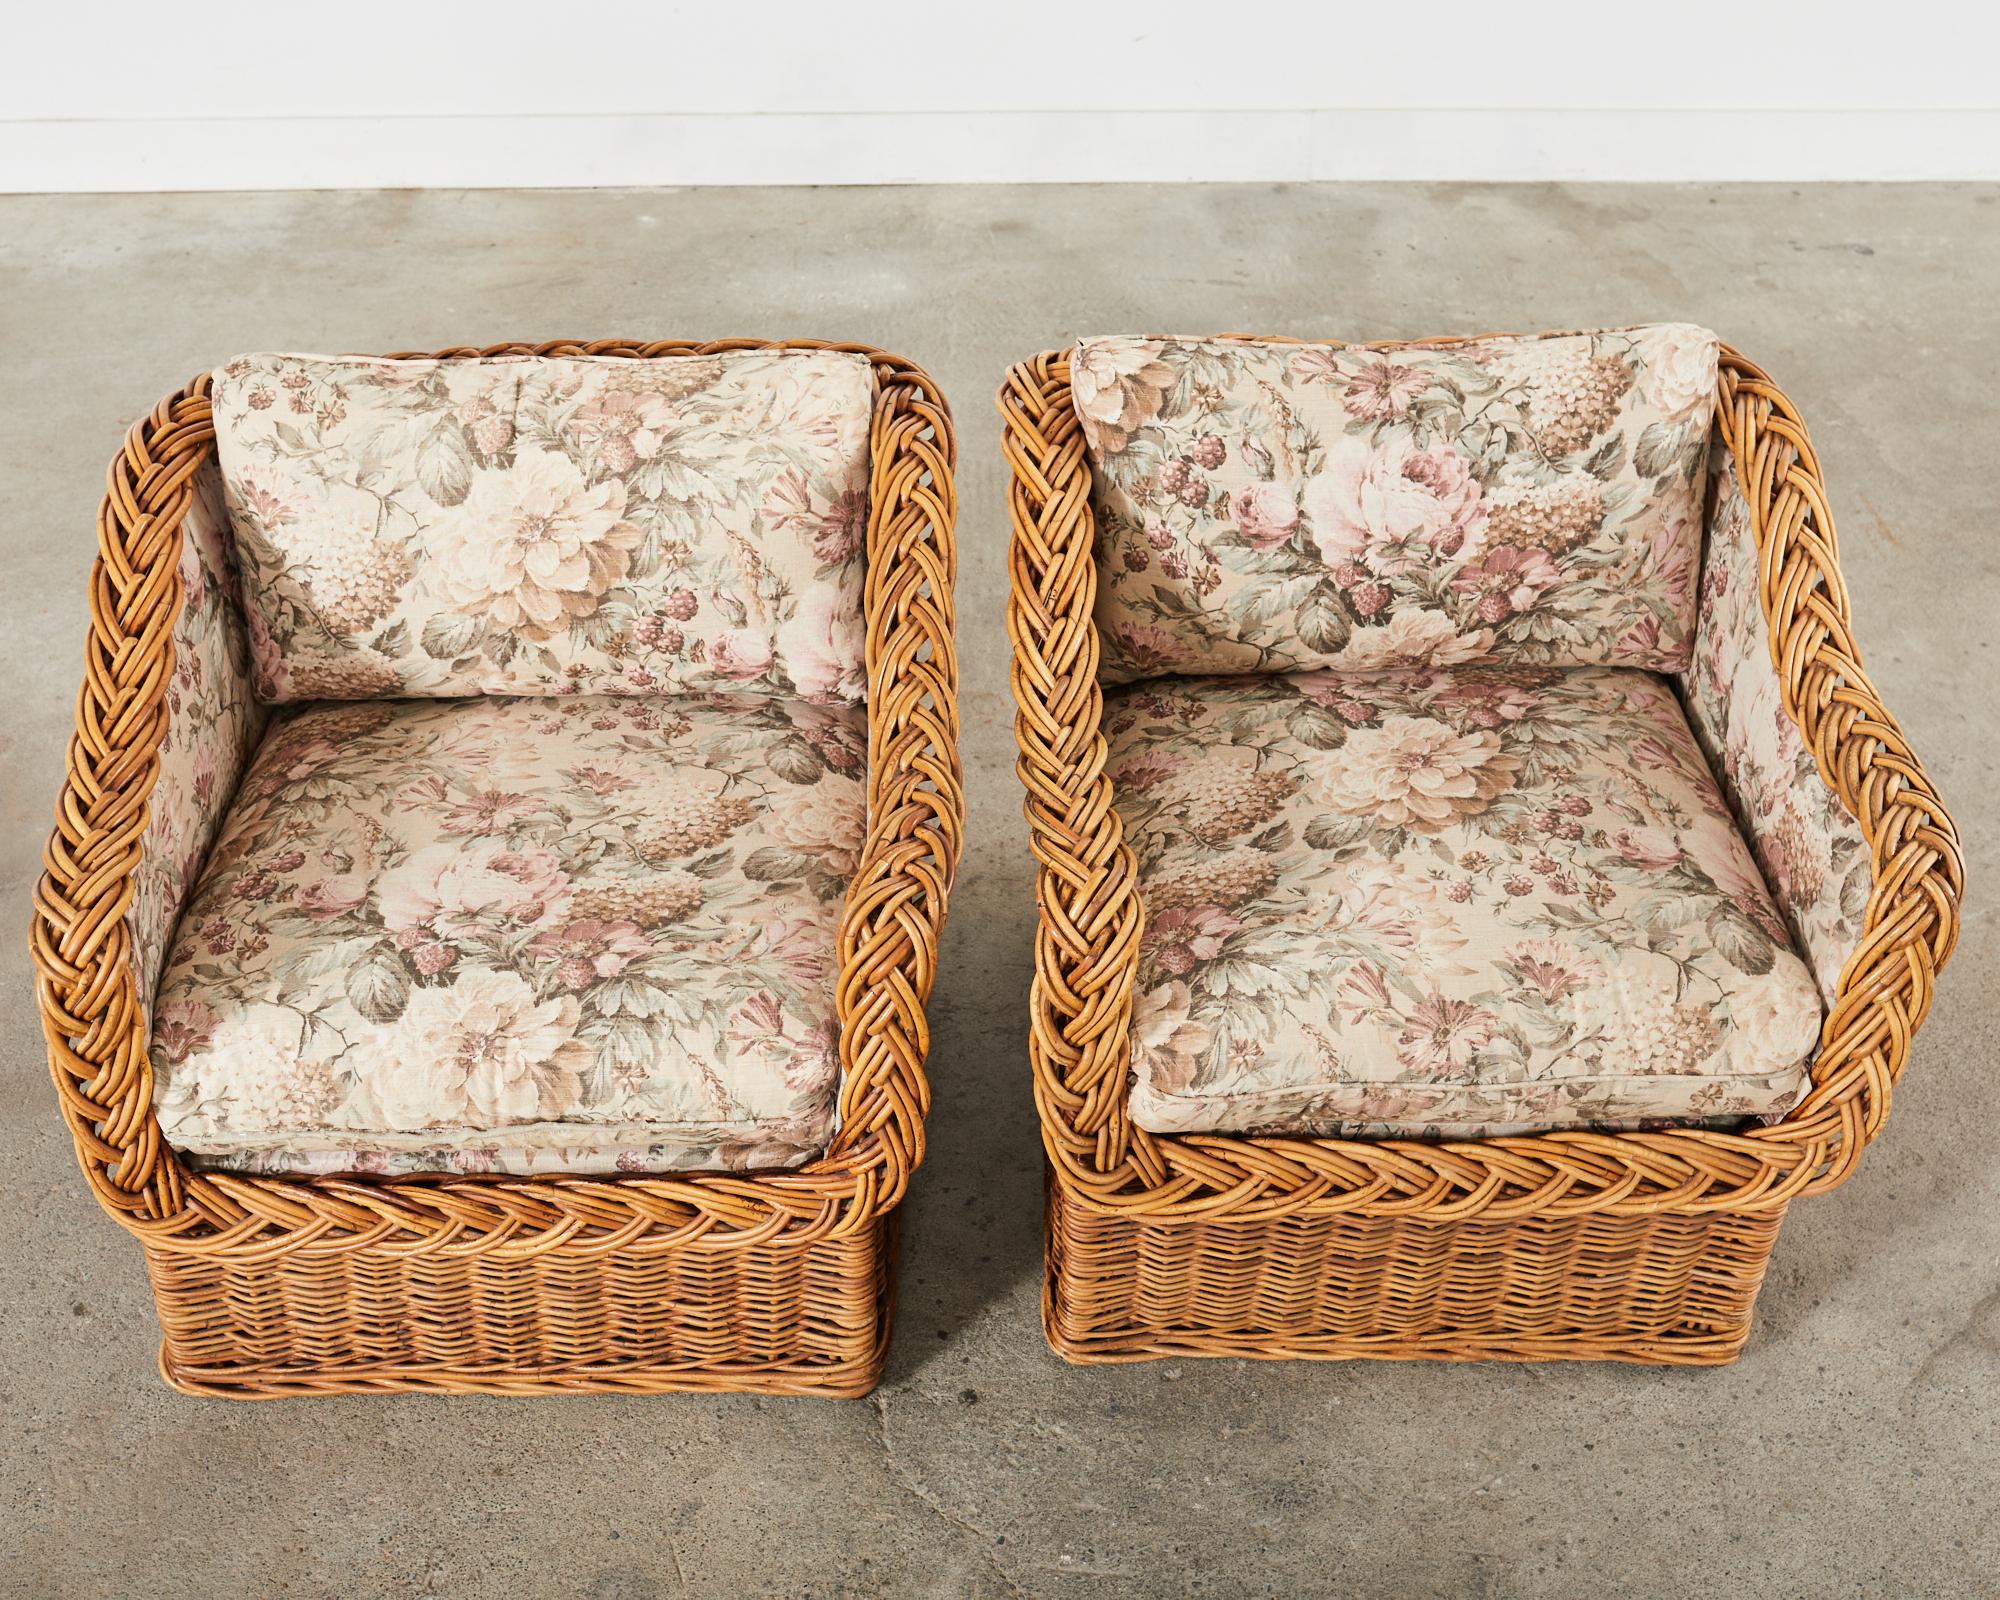 Pair of Italian Wicker Works Rattan Lounge Chairs & Ottoman  For Sale 1